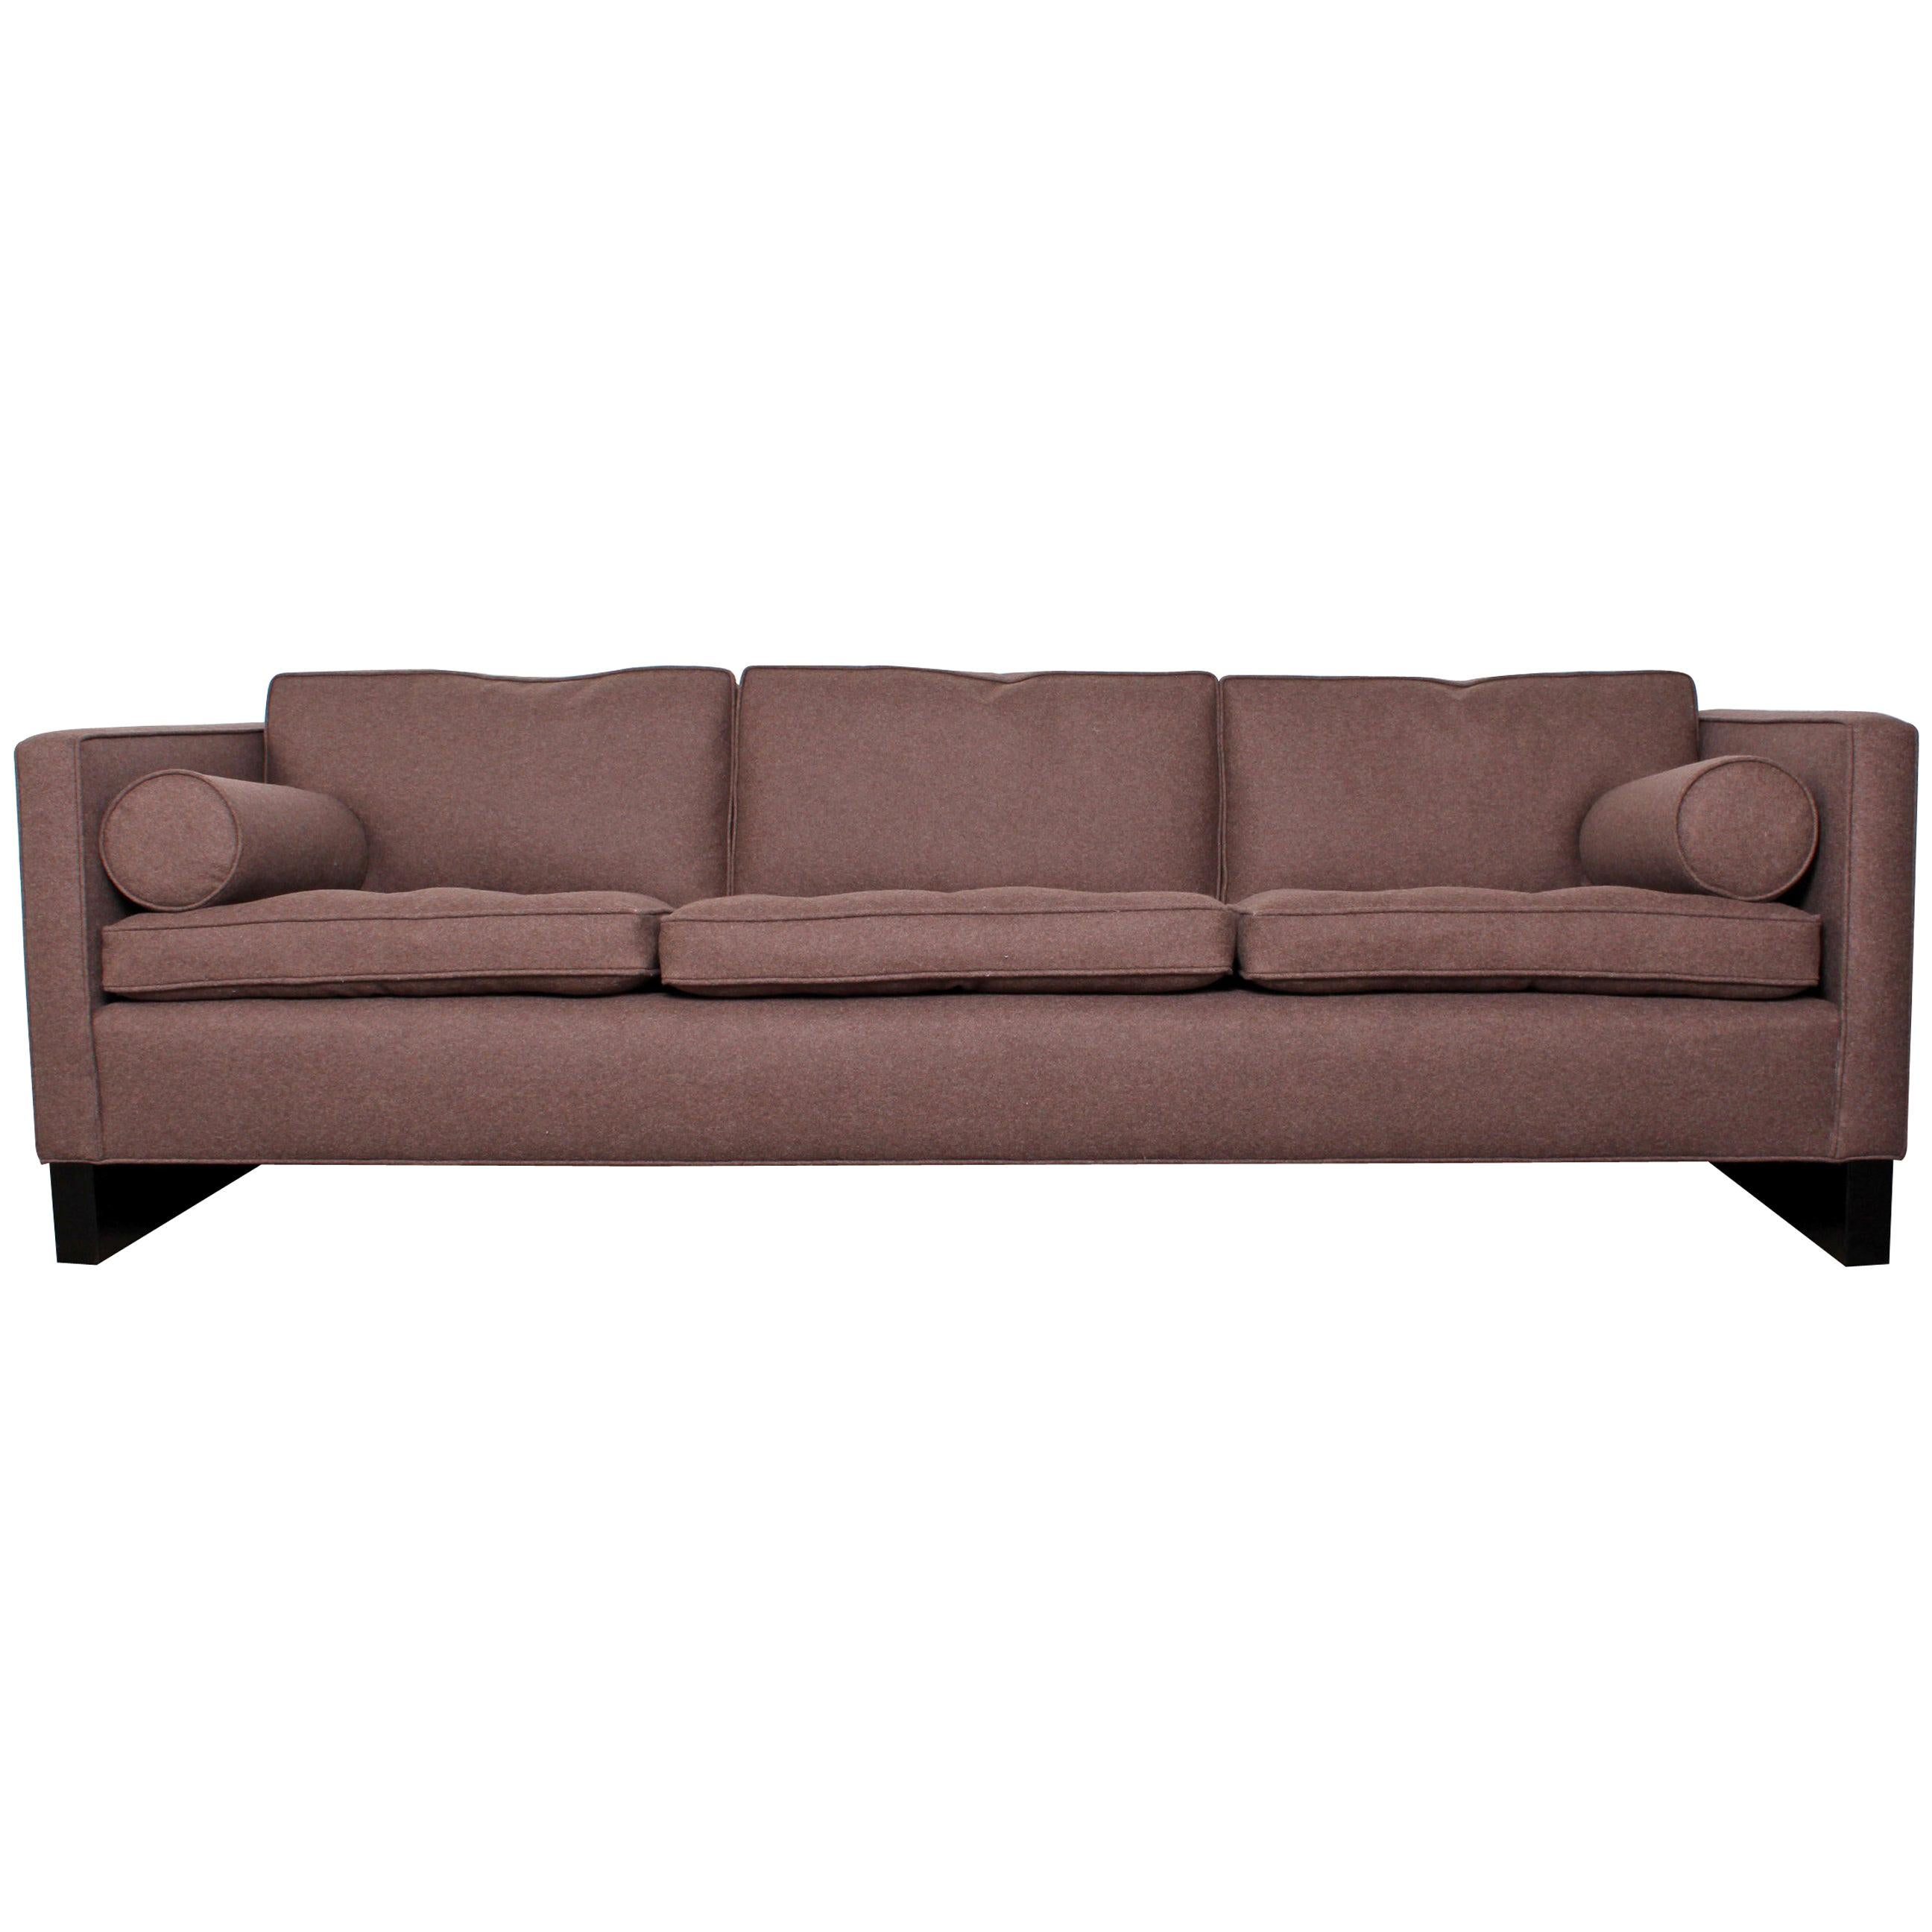 Sofa Designed by Mies Van Der Rohe for Knoll